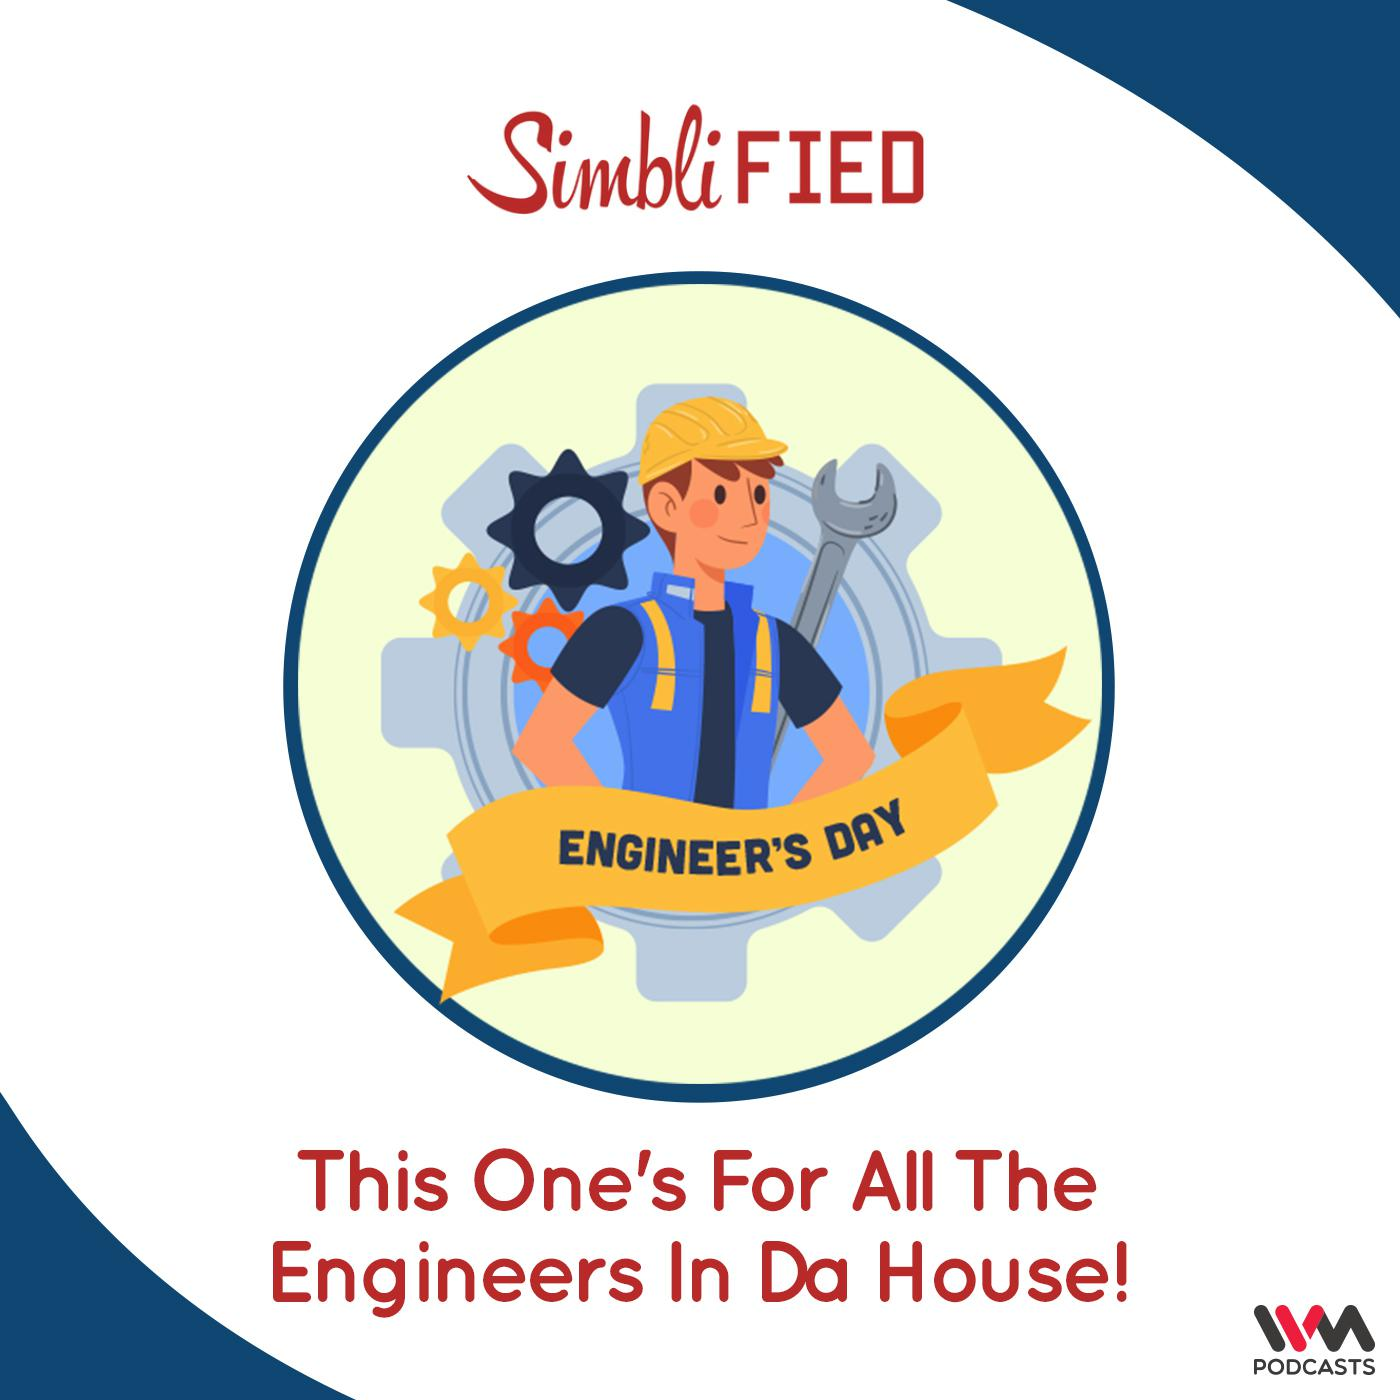 This One’s For All The Engineers In Da House!